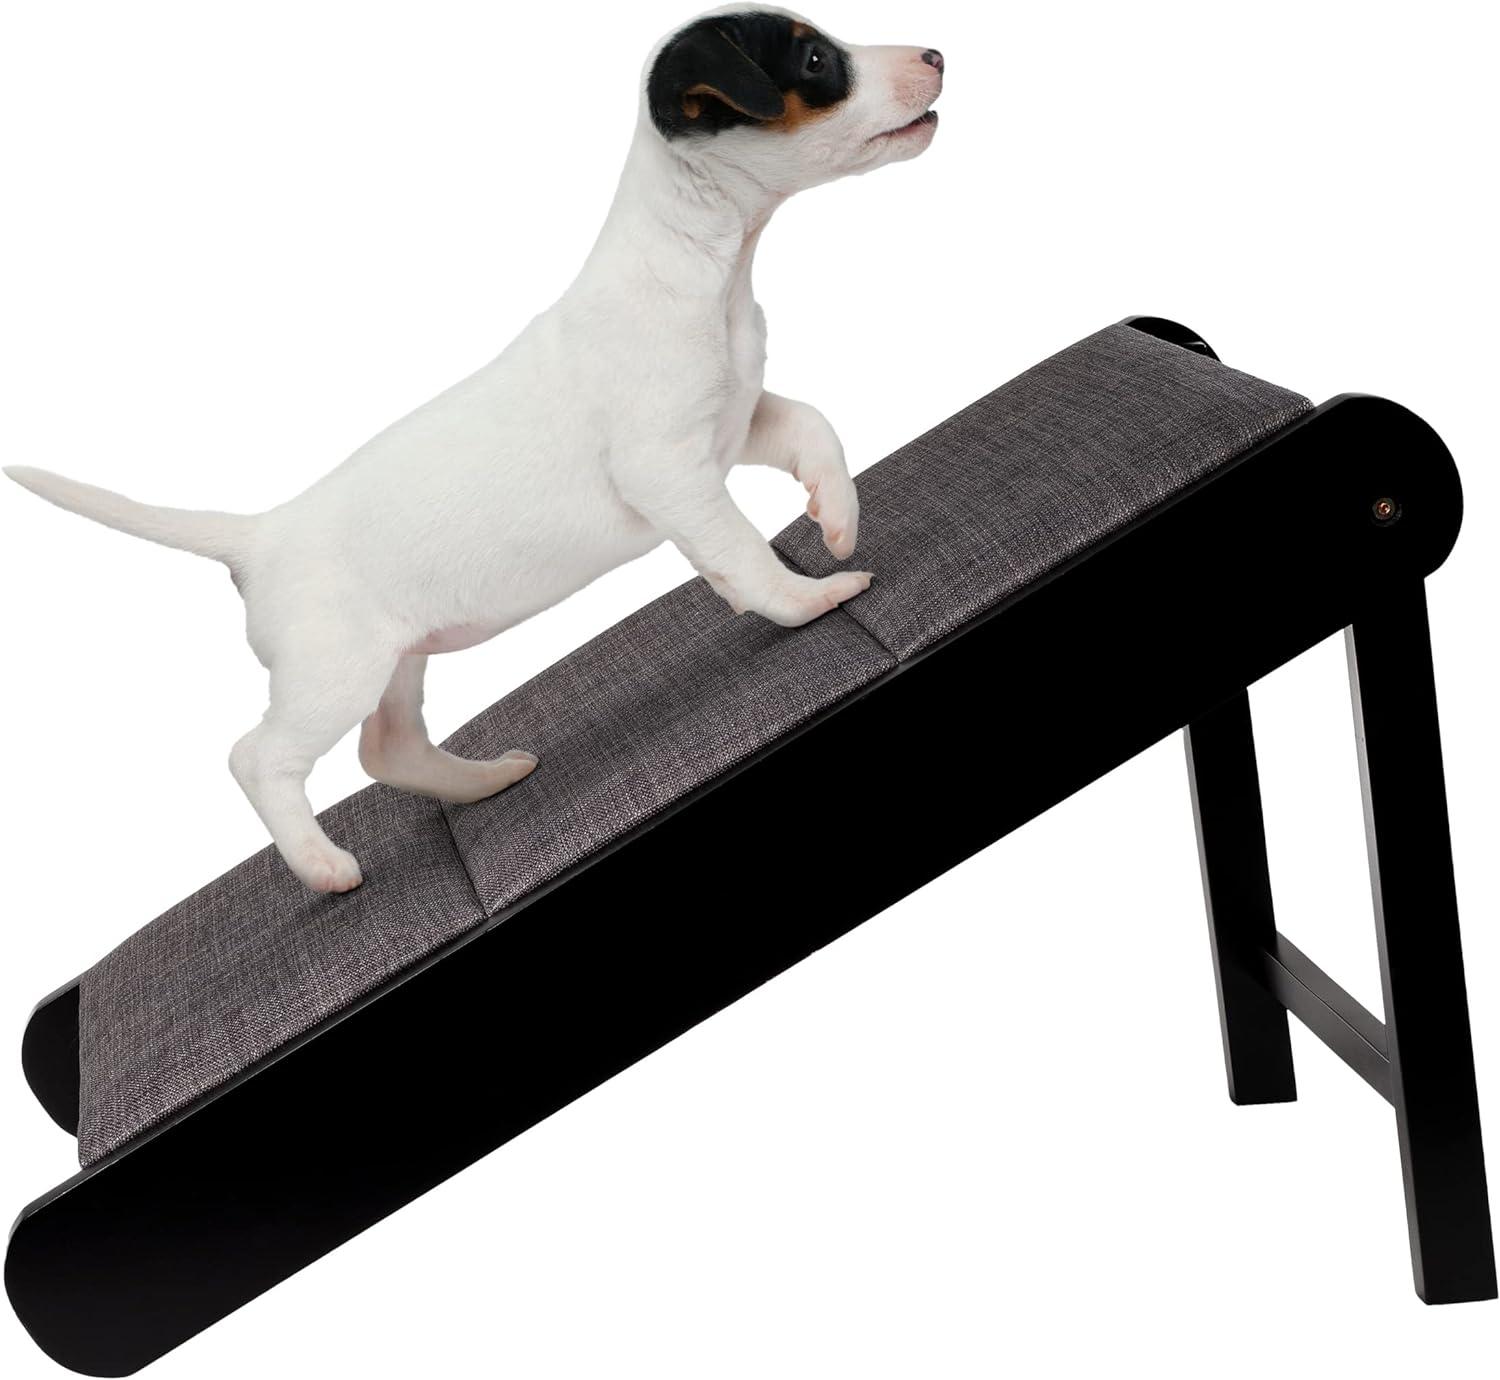 Foldable Wooden Dog Ramp for Small Pets for $40.03 Shipped